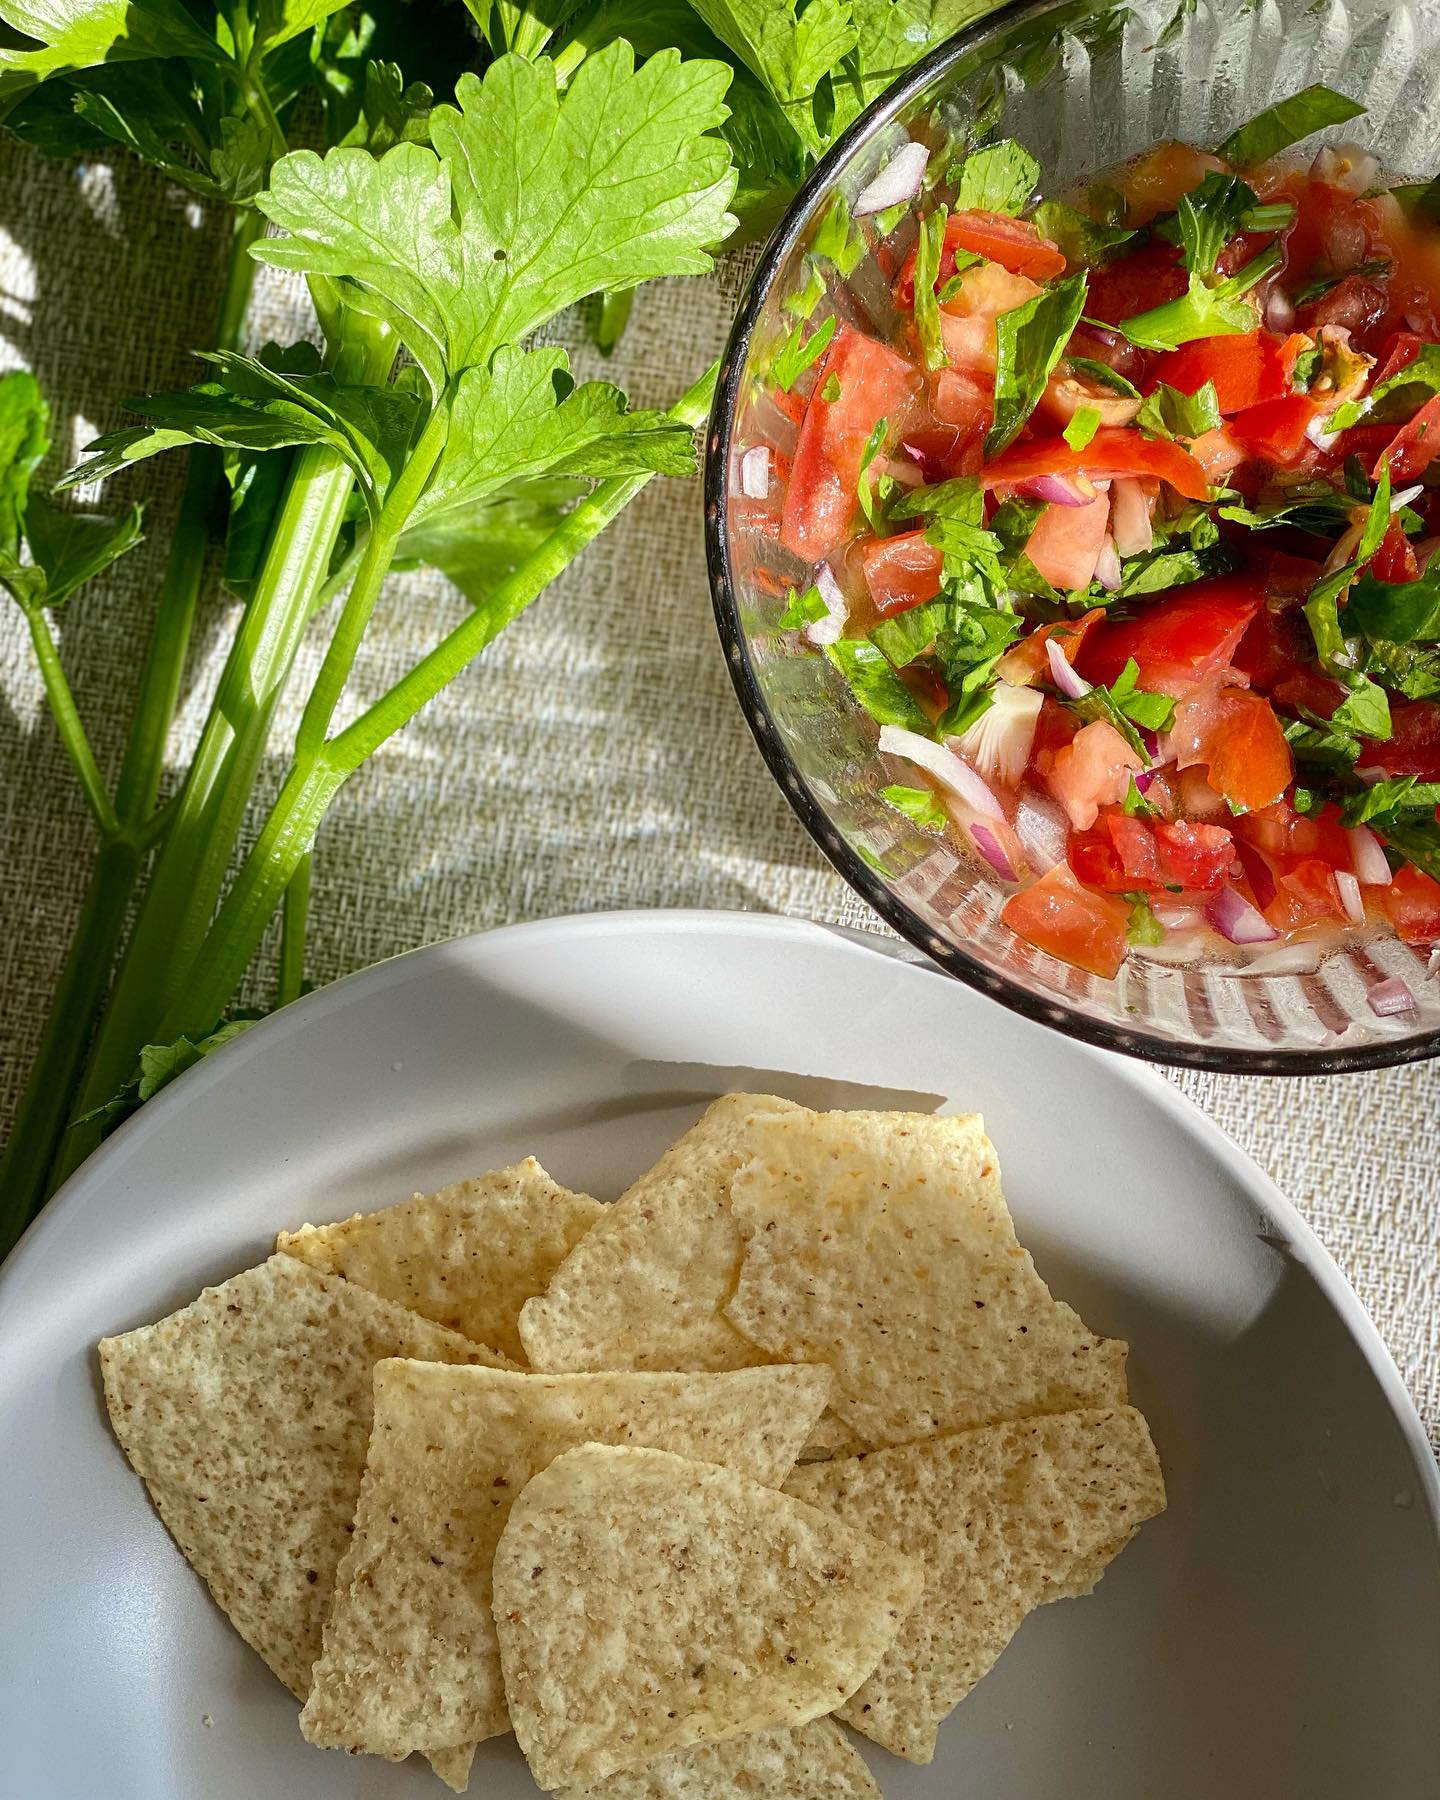 Chips and homemade salsa